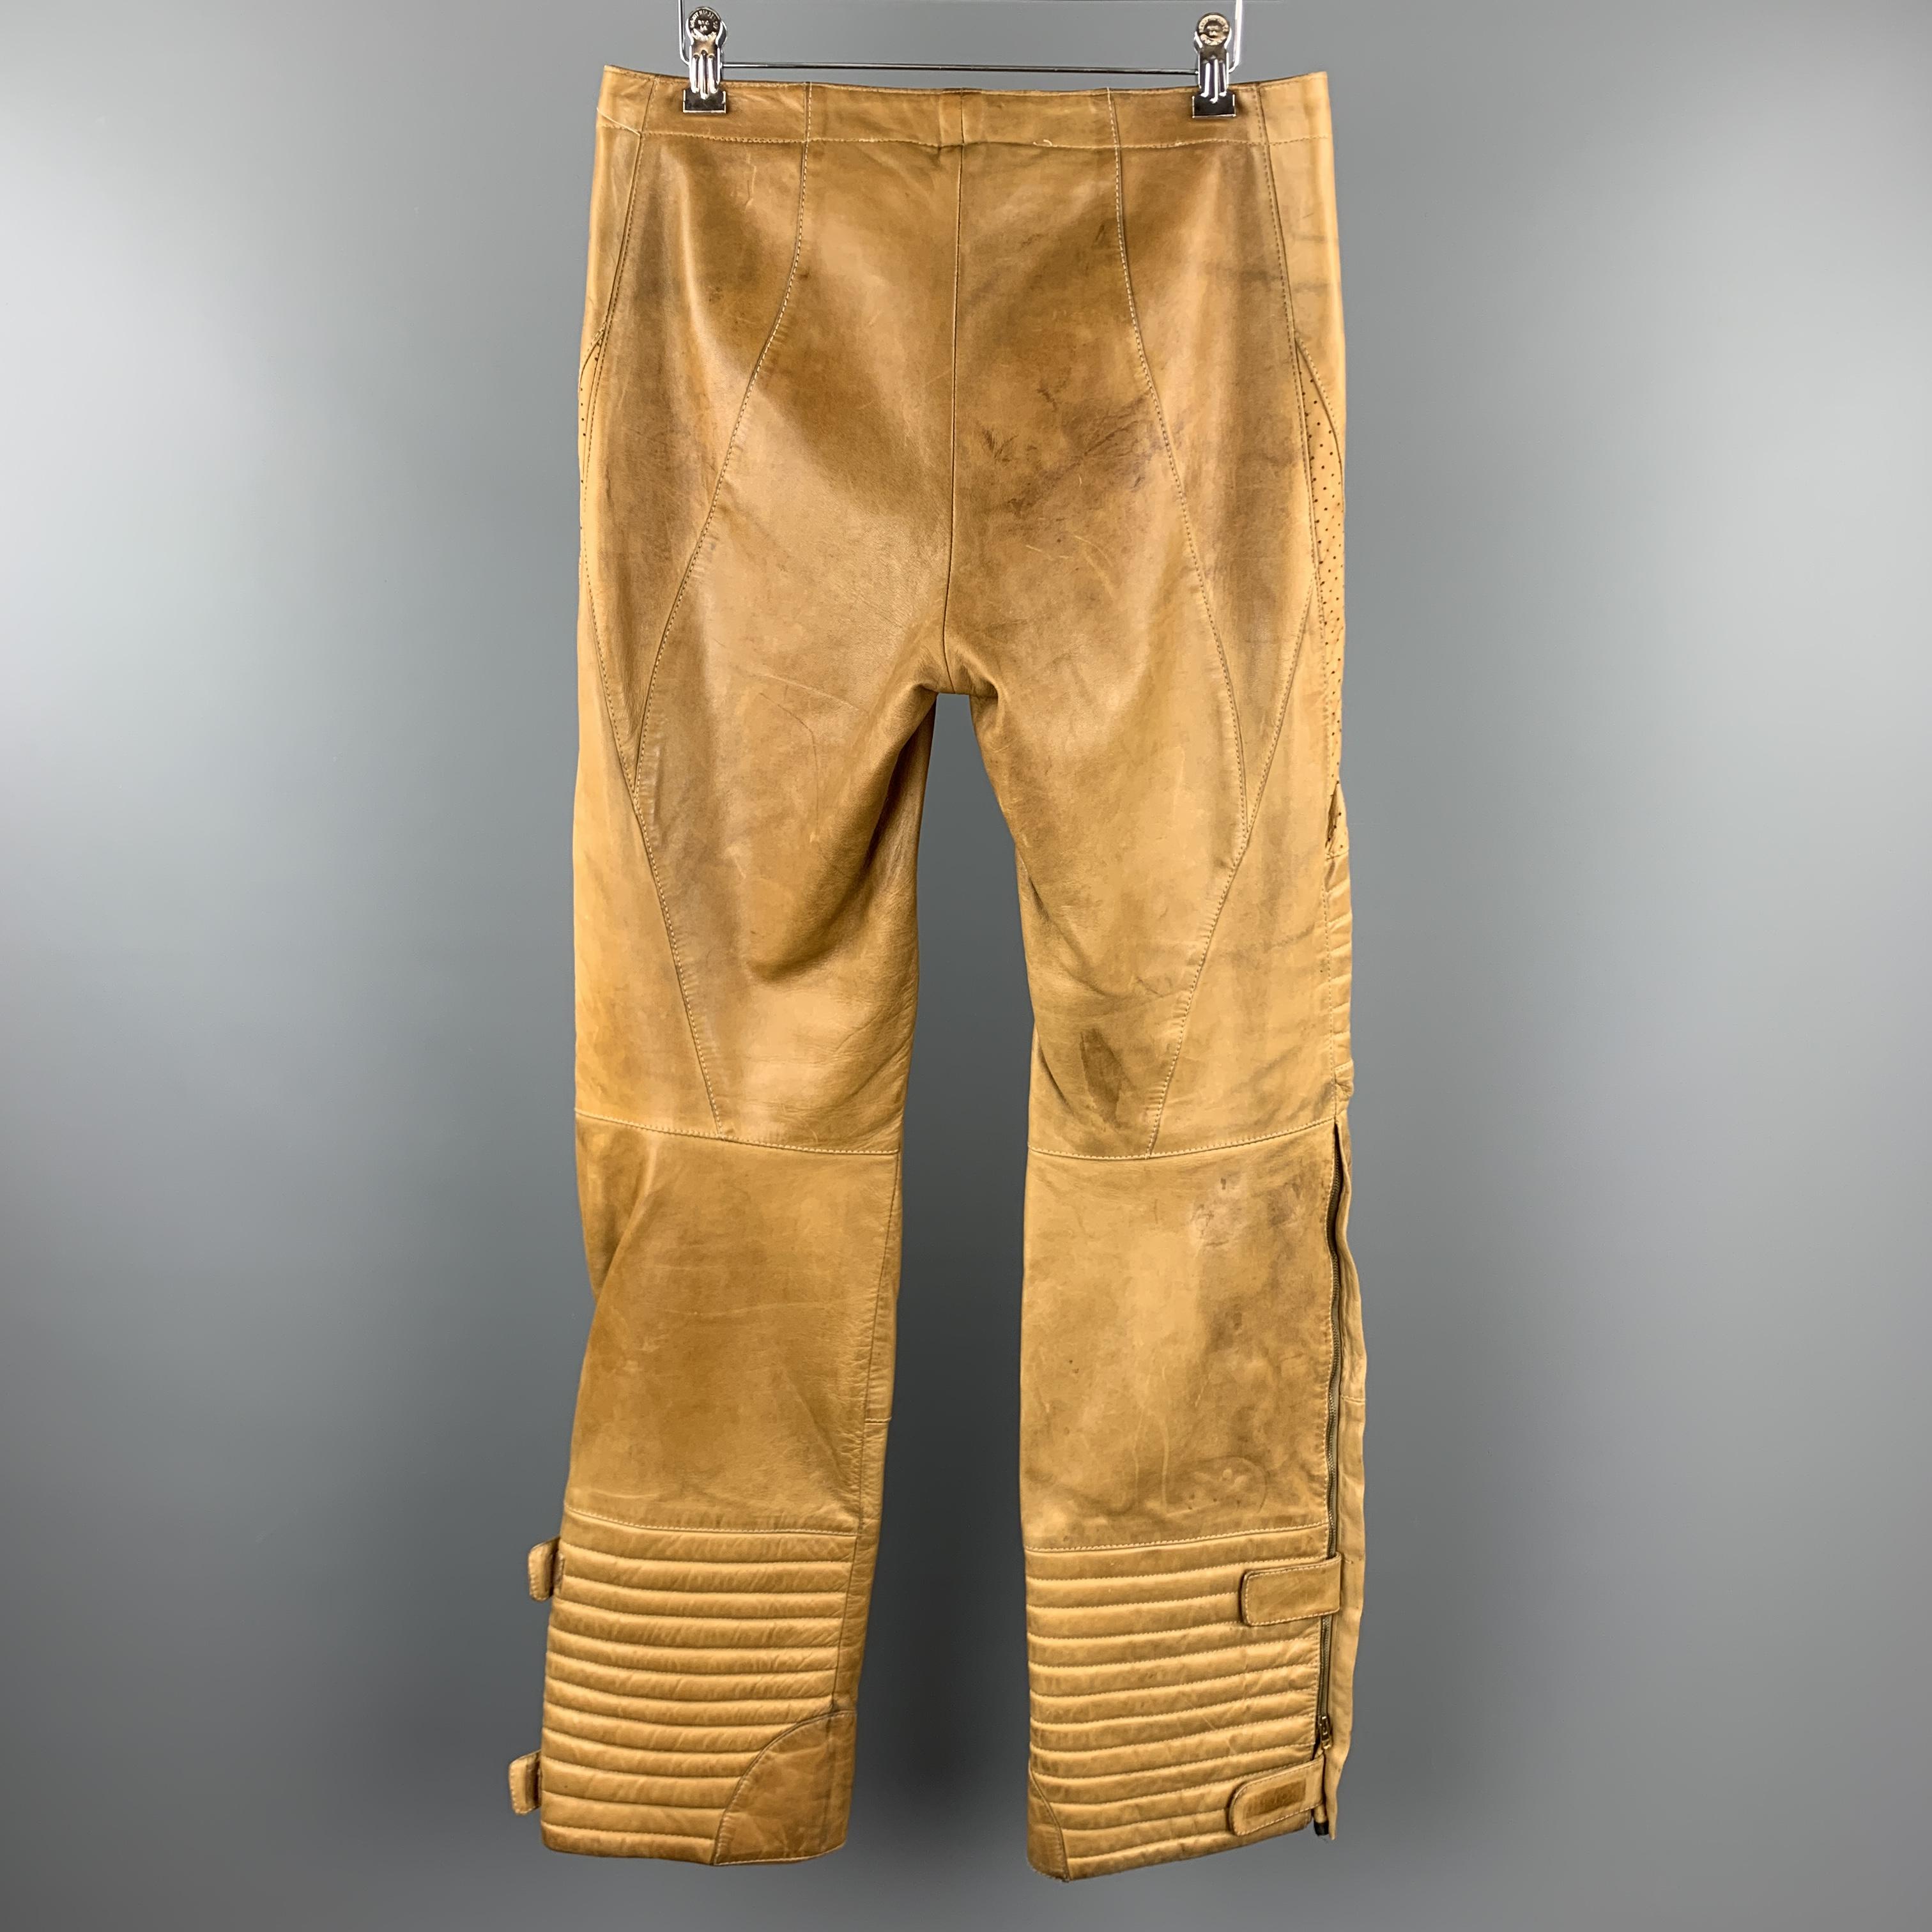 GUCCI by TOM FORD Size 30 Tan Leather Motorcycle Pants 2